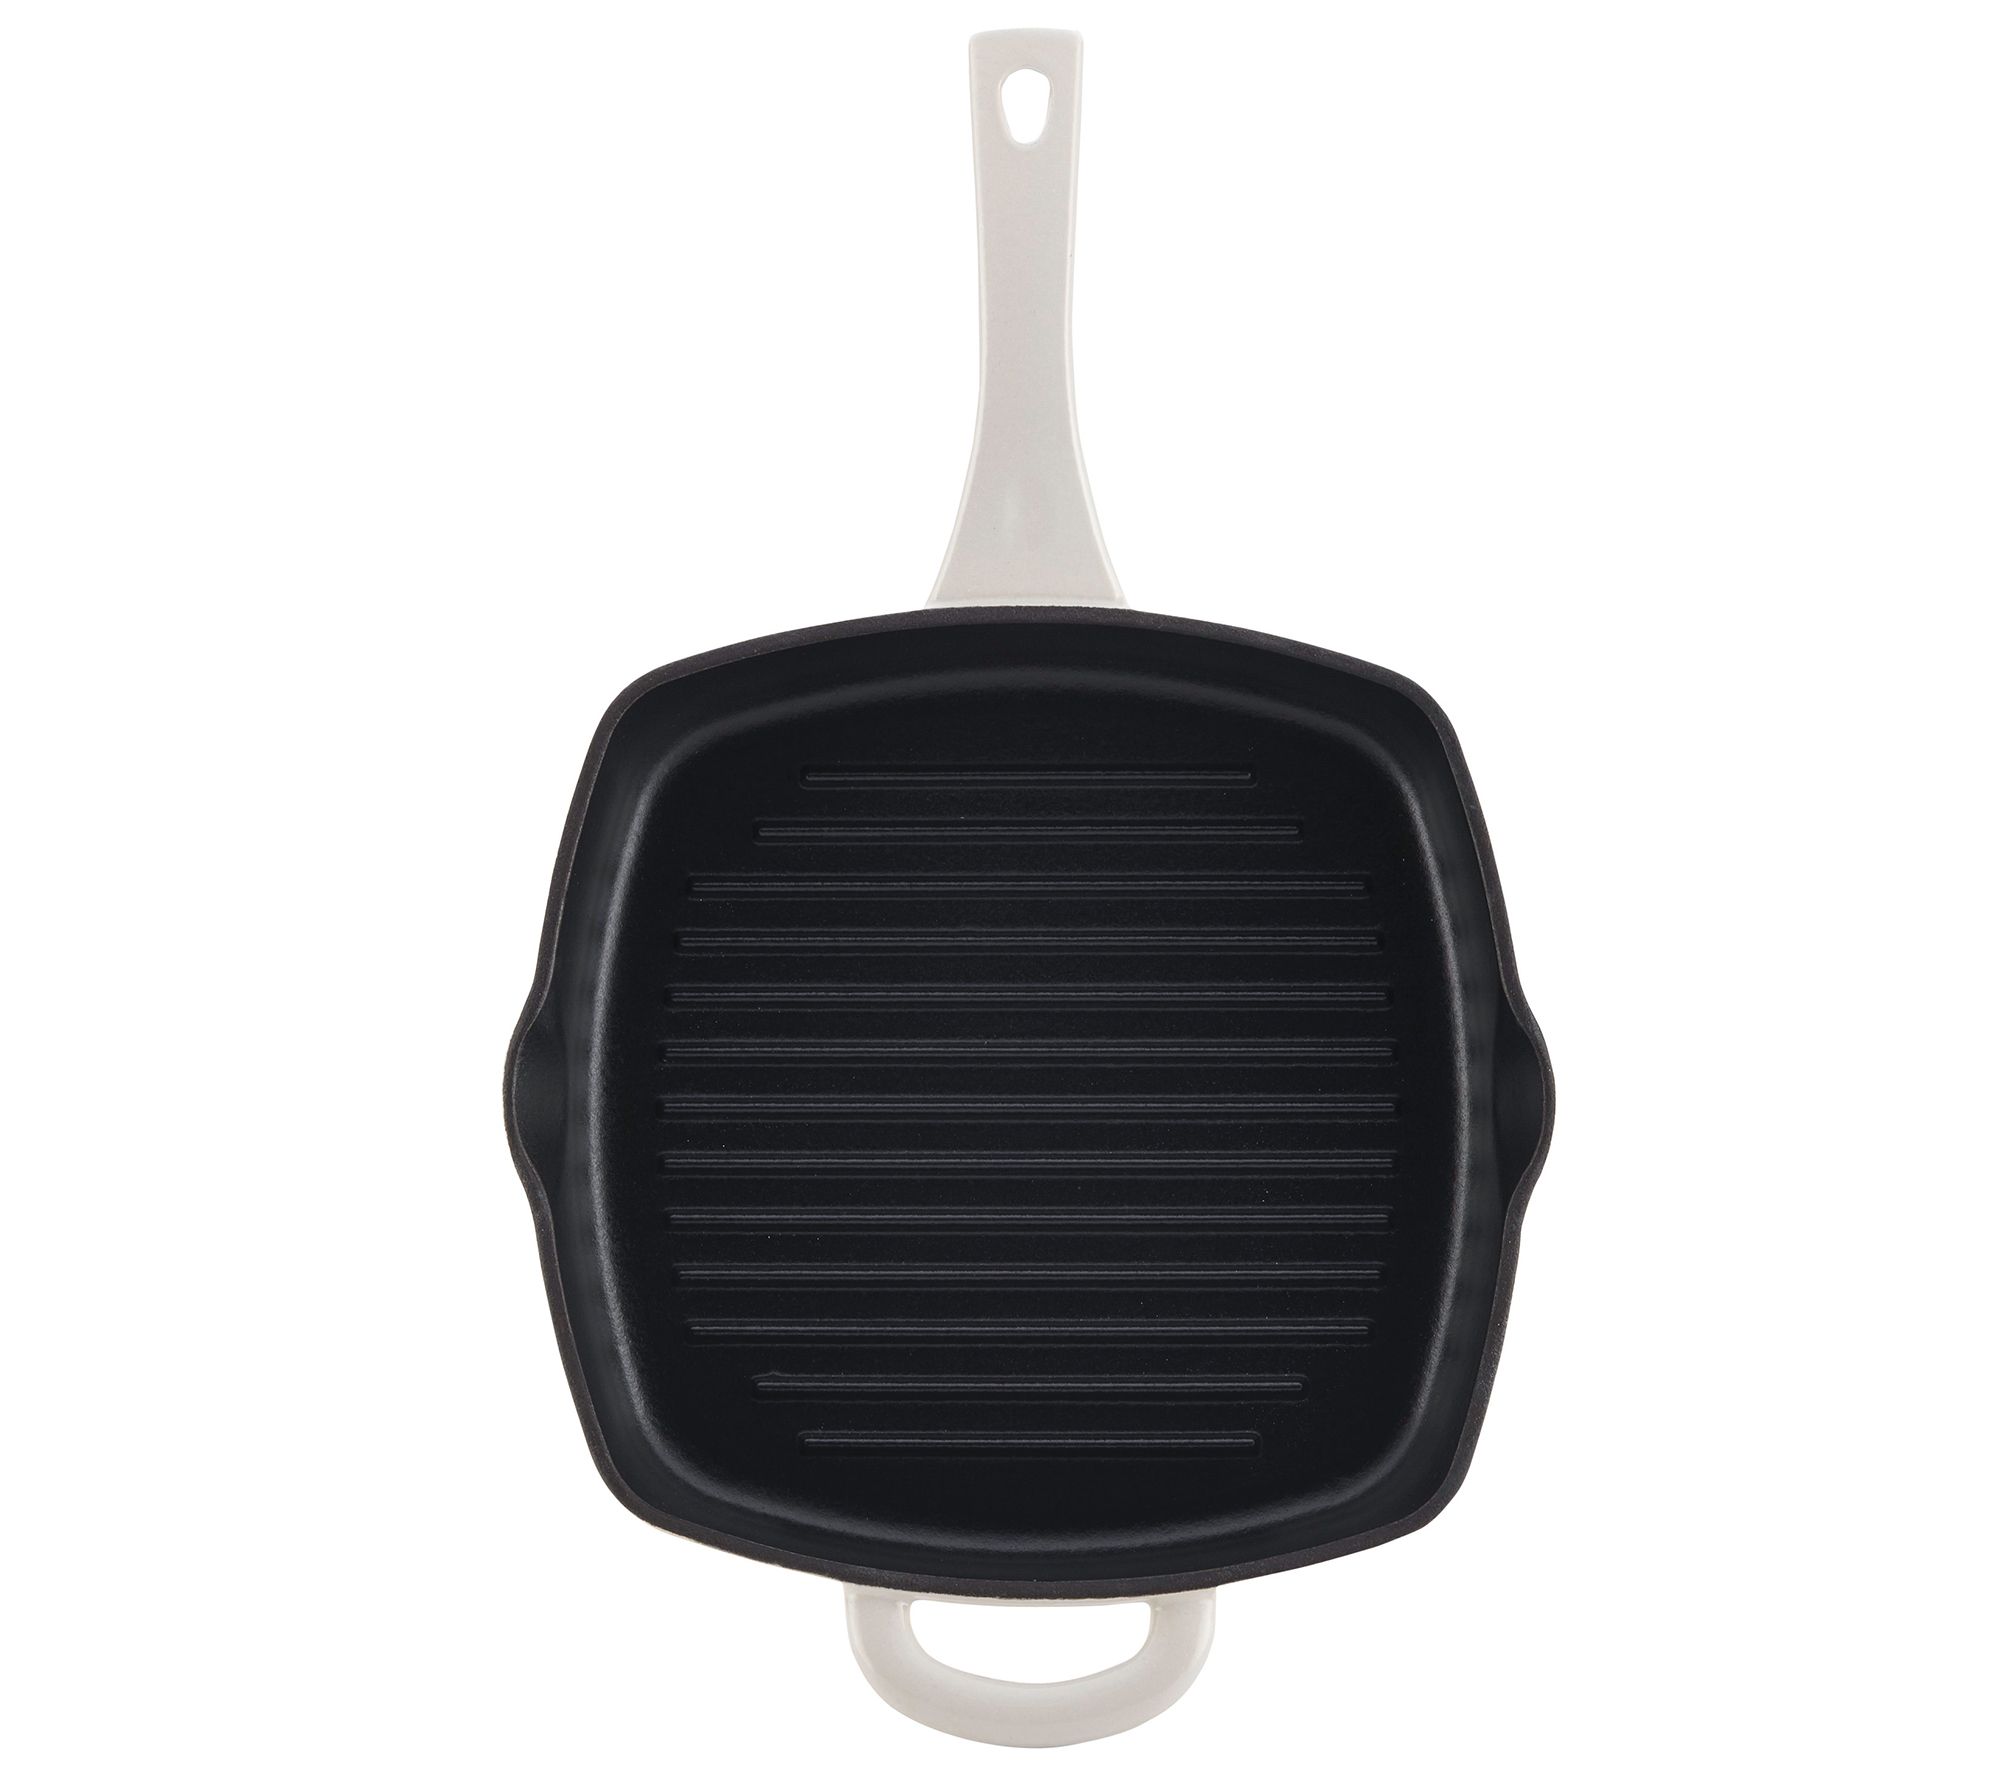 Ayesha Curry Cast Iron Enamel Cookware Review - Consumer Reports